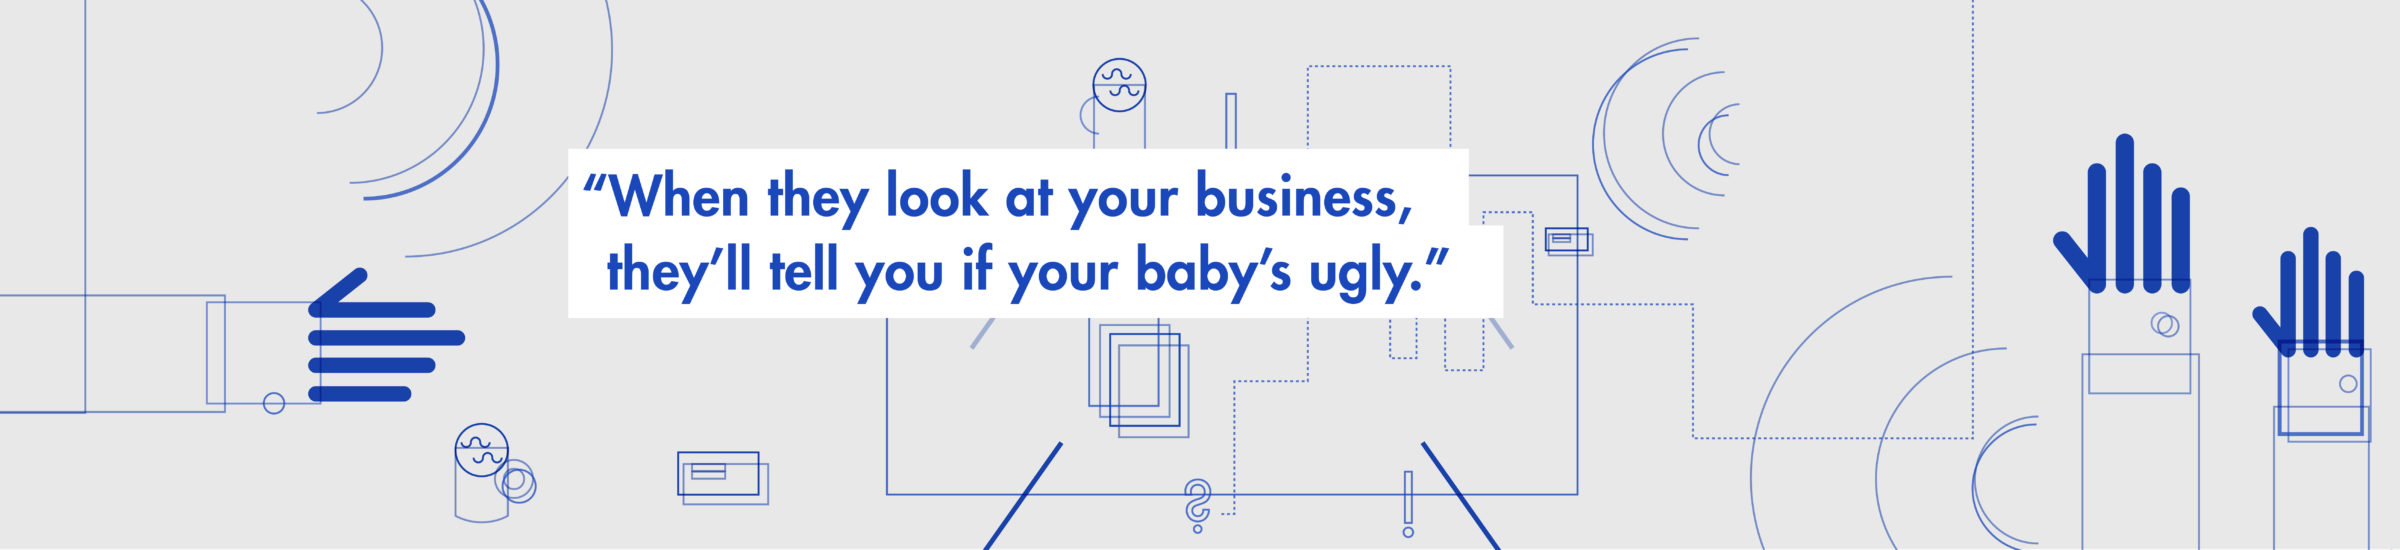 When they look at your business, they'll tell you if your baby's ugly."